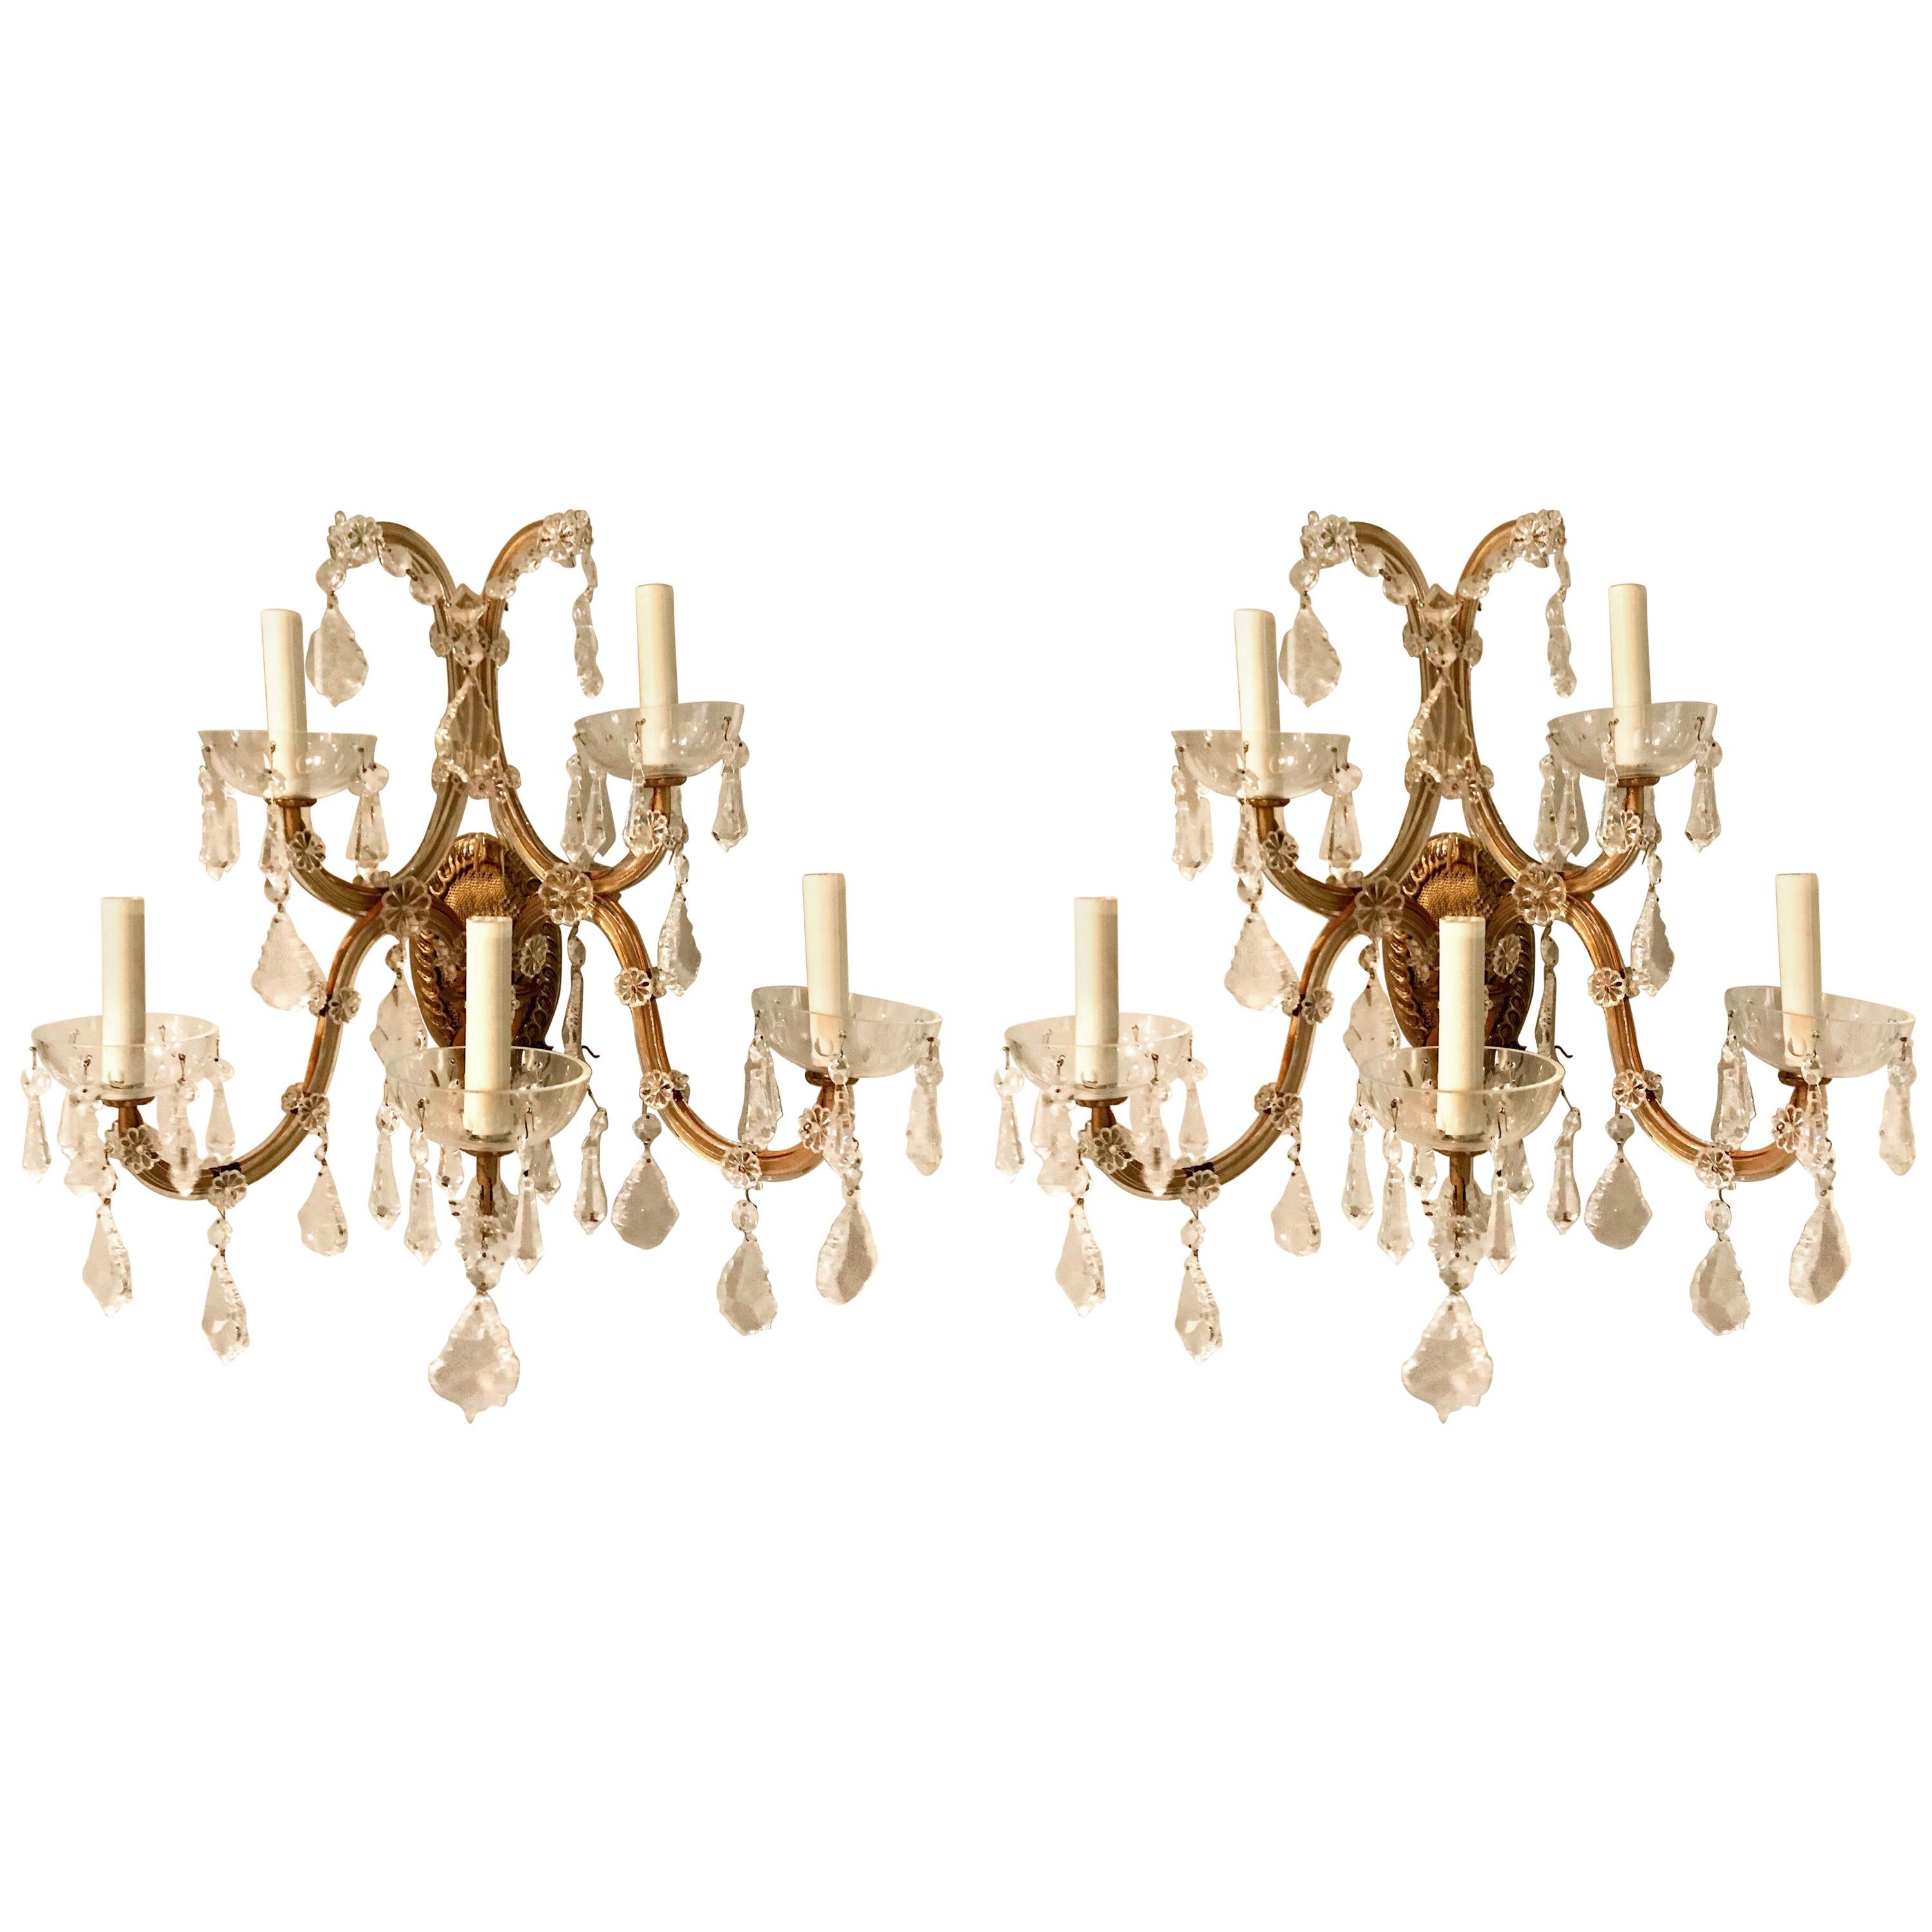 Pair of Vintage Italian Gilt Metal and Crystal Sconces